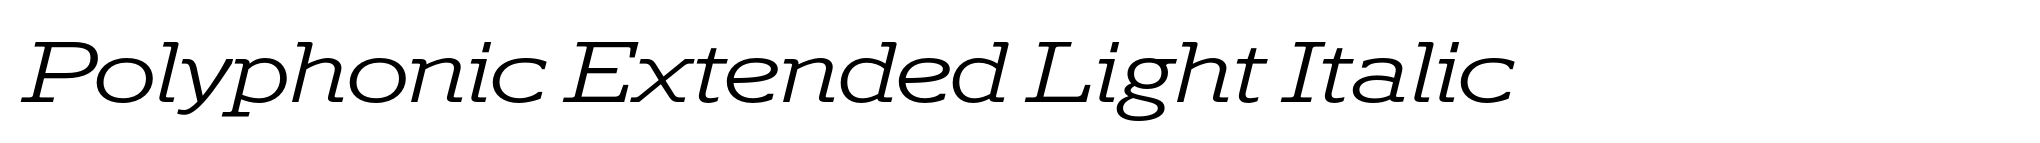 Polyphonic Extended Light Italic image